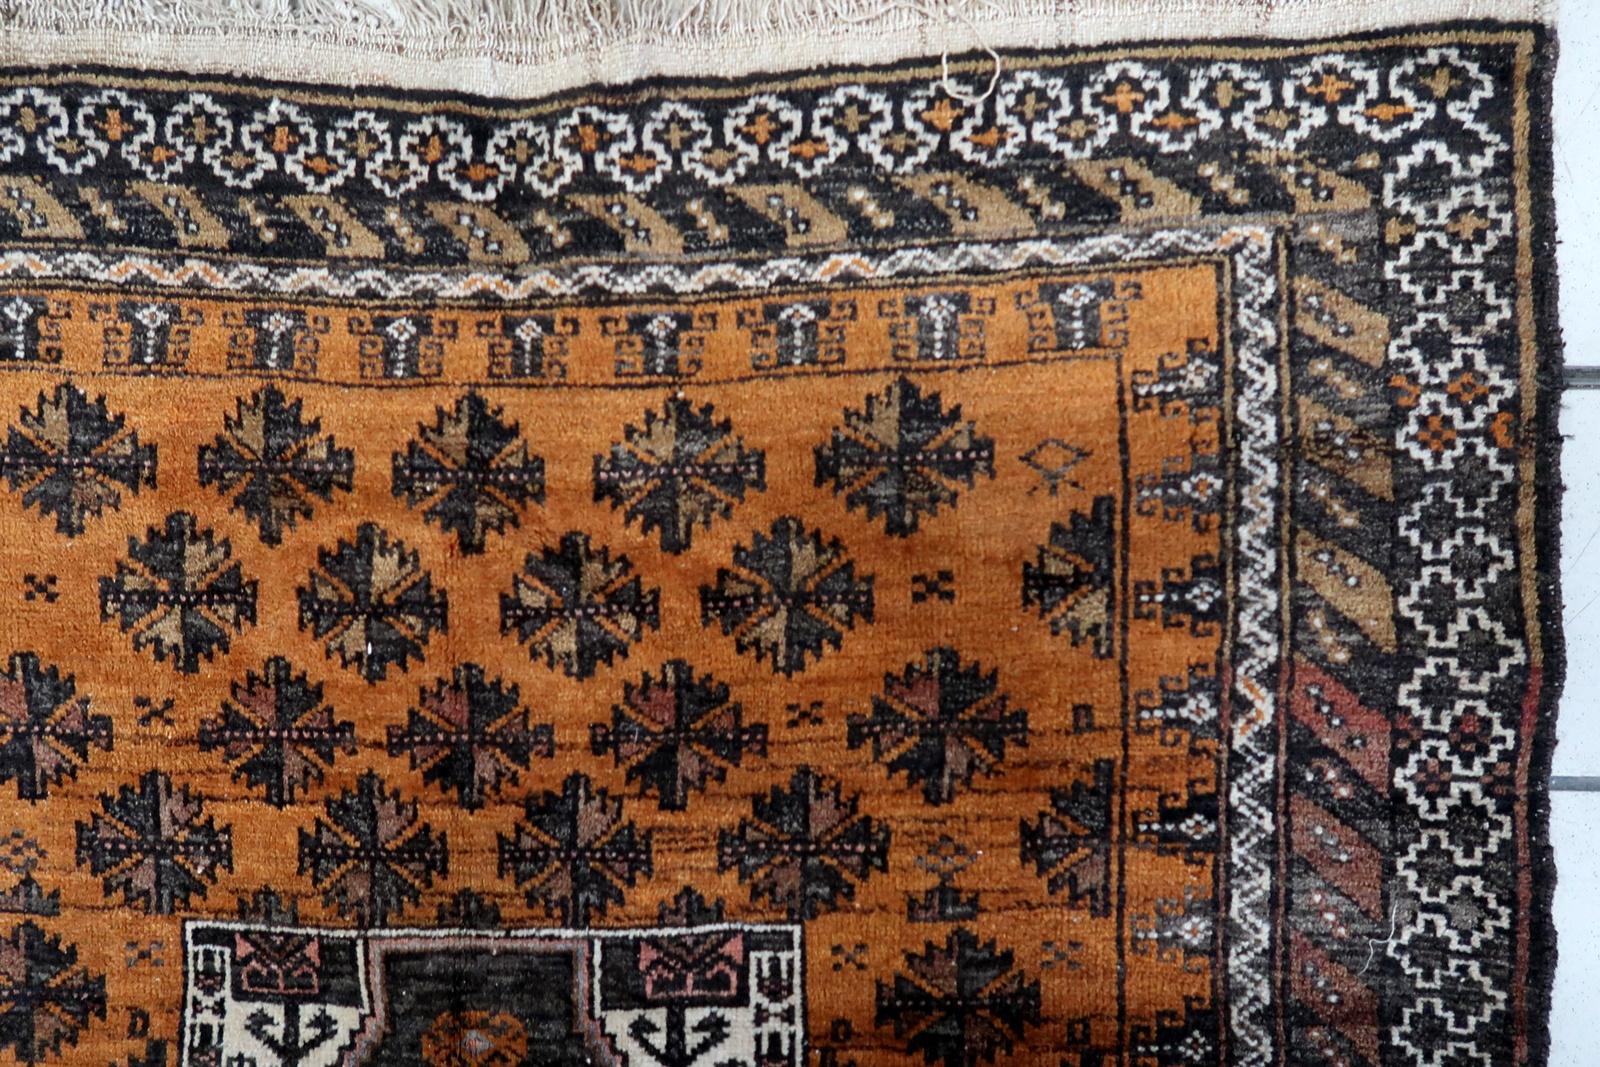 Handmade Antique Afghan Baluch Rug:

Indulge in the timeless allure of our Handmade Antique Afghan Baluch Rug, meticulously crafted in the 1920s. Measuring 3.5’ x 6.2’ (107cm x 189cm), this versatile piece is a testament to Afghan Baluch weavers'